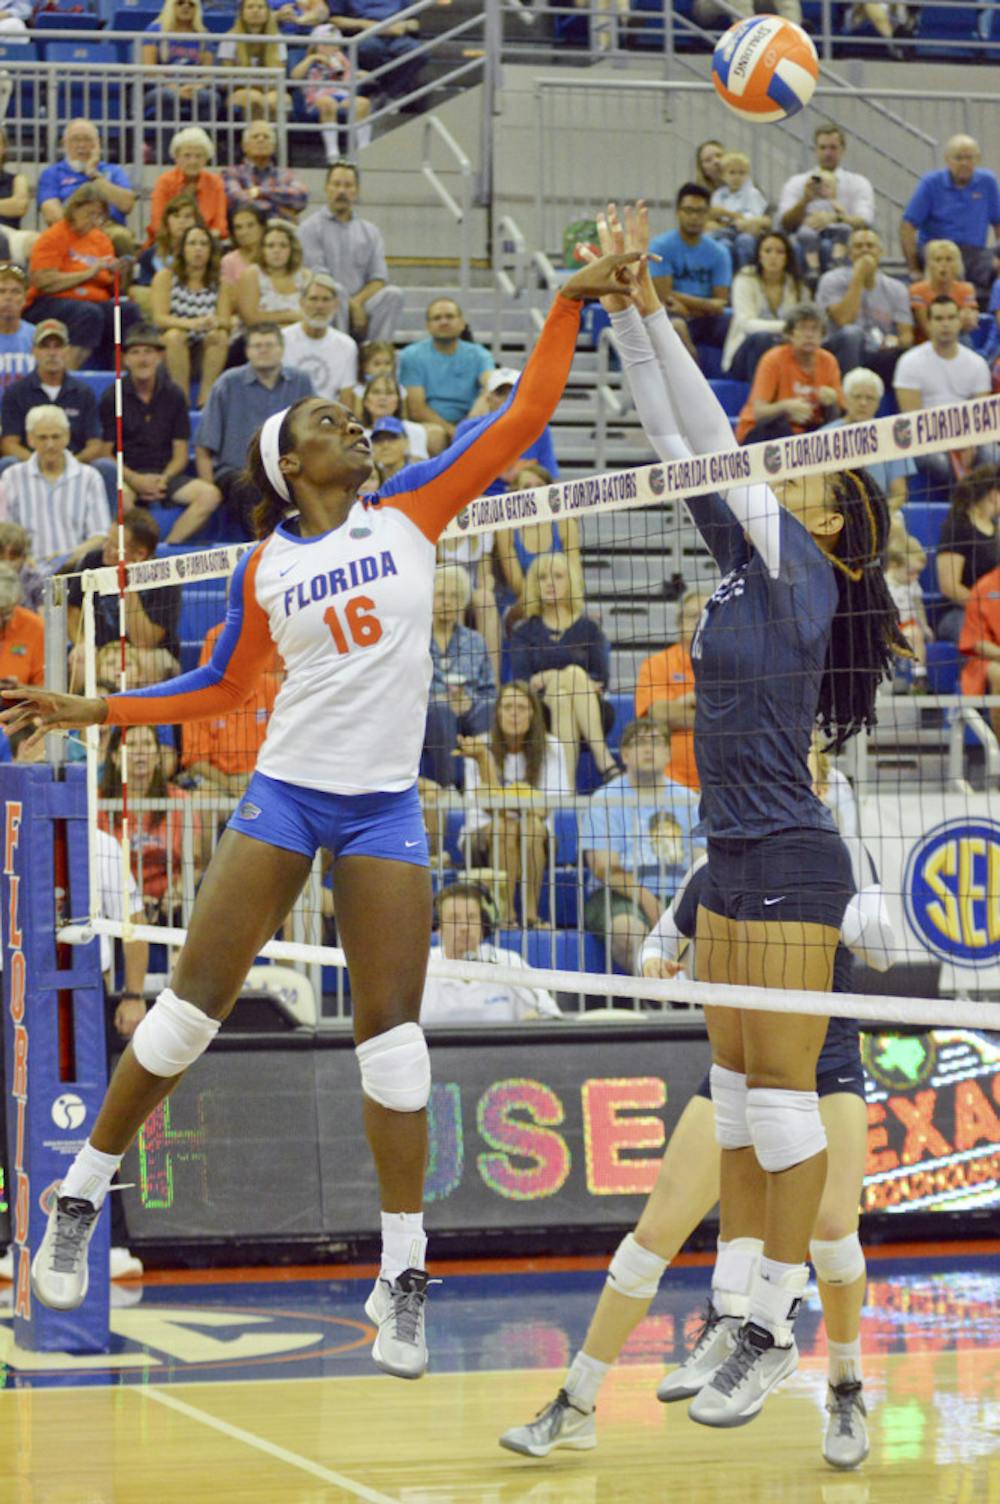 <p>UF middle blocker Simone Antwi tips a ball over the net during Florida's 3-0 win against Ole Miss on Sept. 28, 2014, in the O'Connell Center.</p>